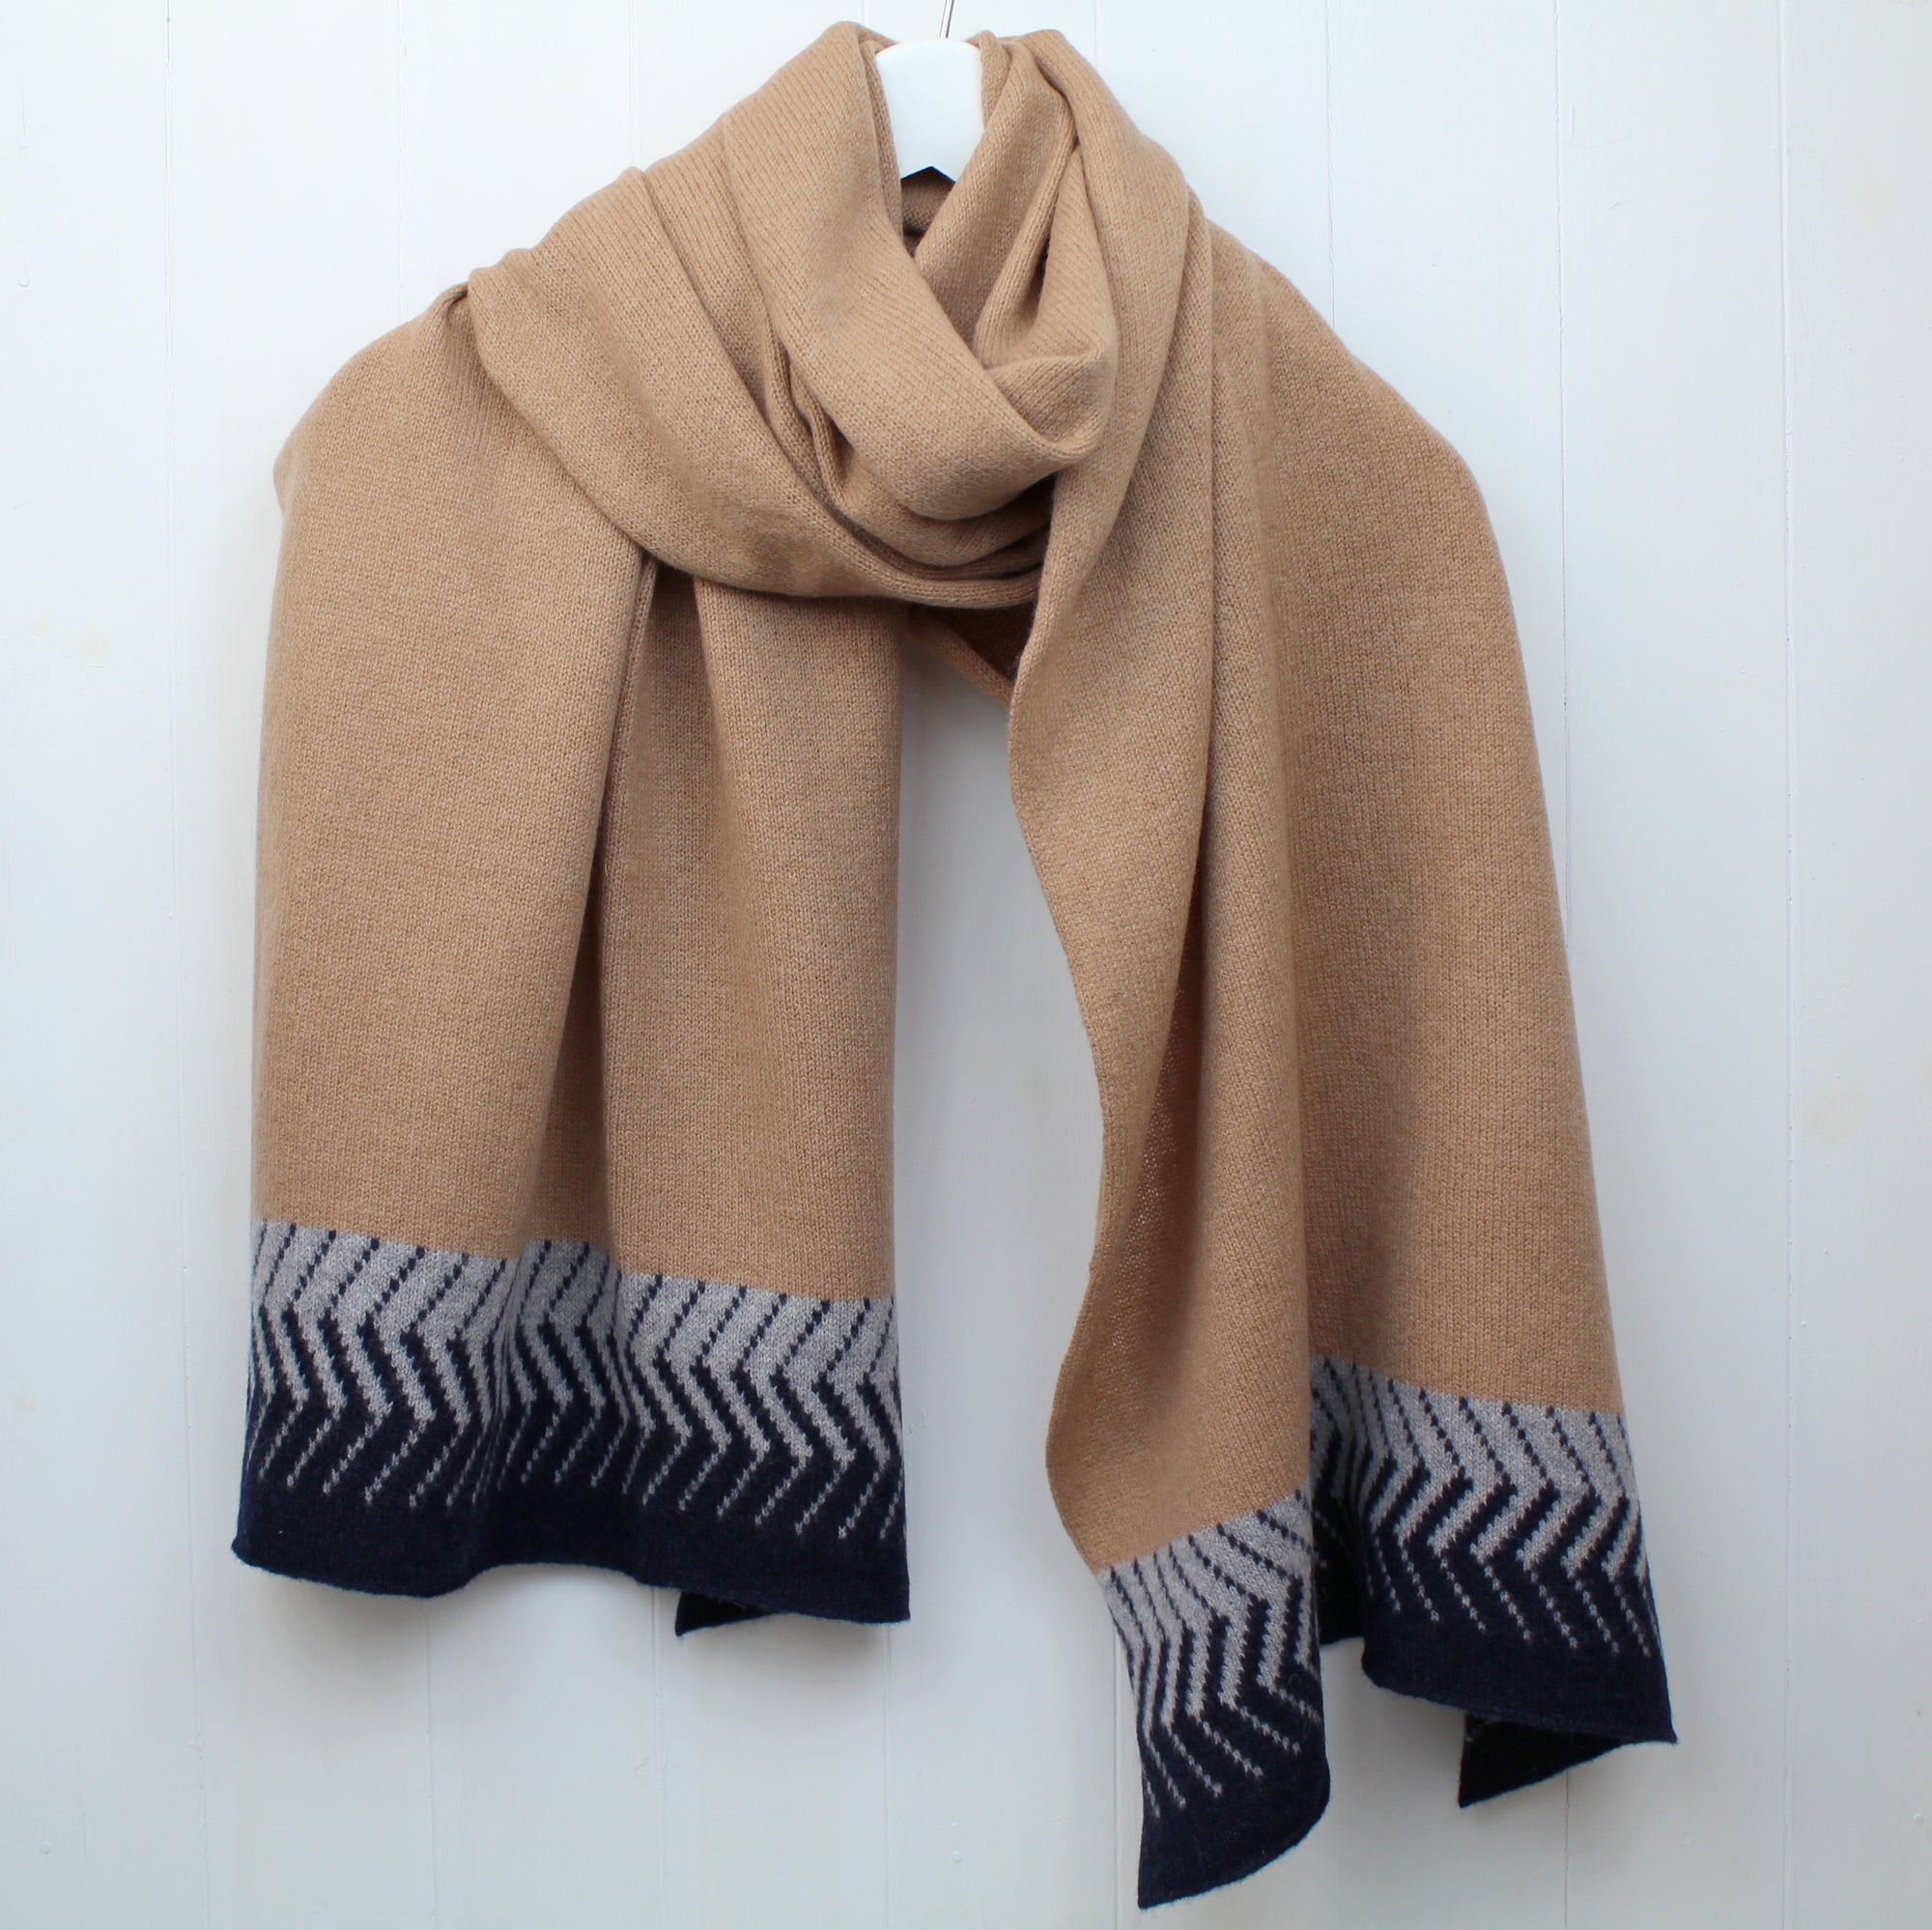 Chevron knitted wrap - camel/navy (MADE TO ORDER)